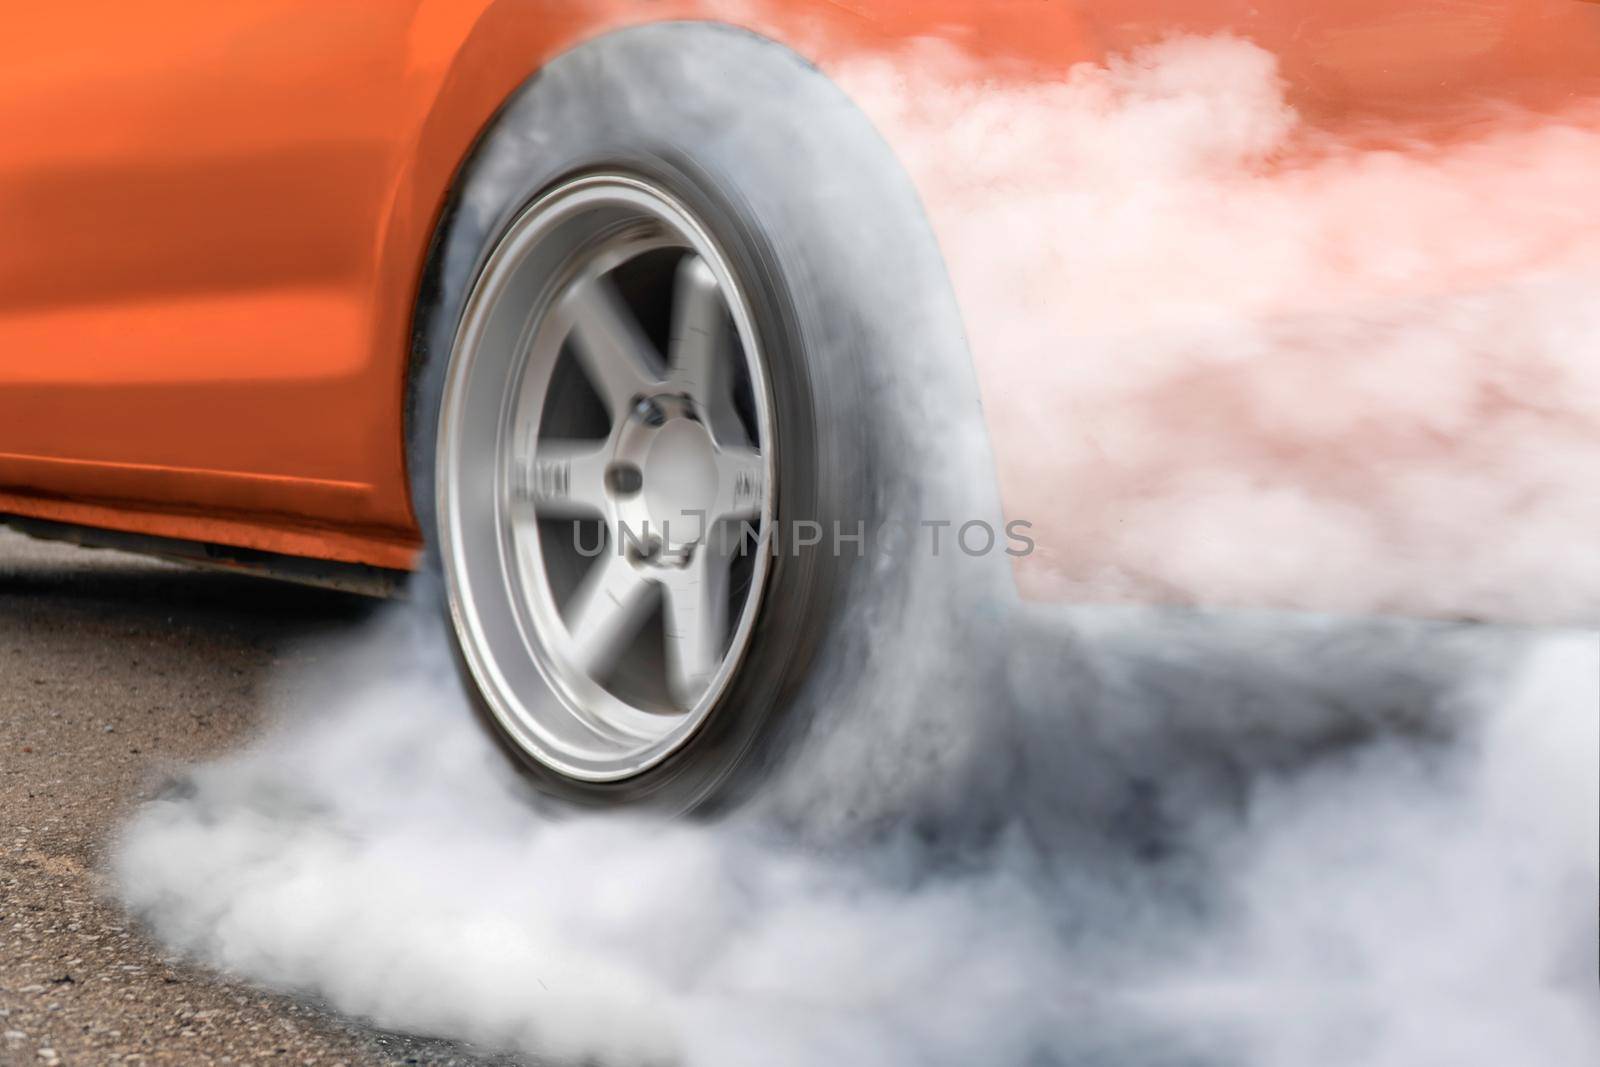 Race drift car burning tires on playground by toa55